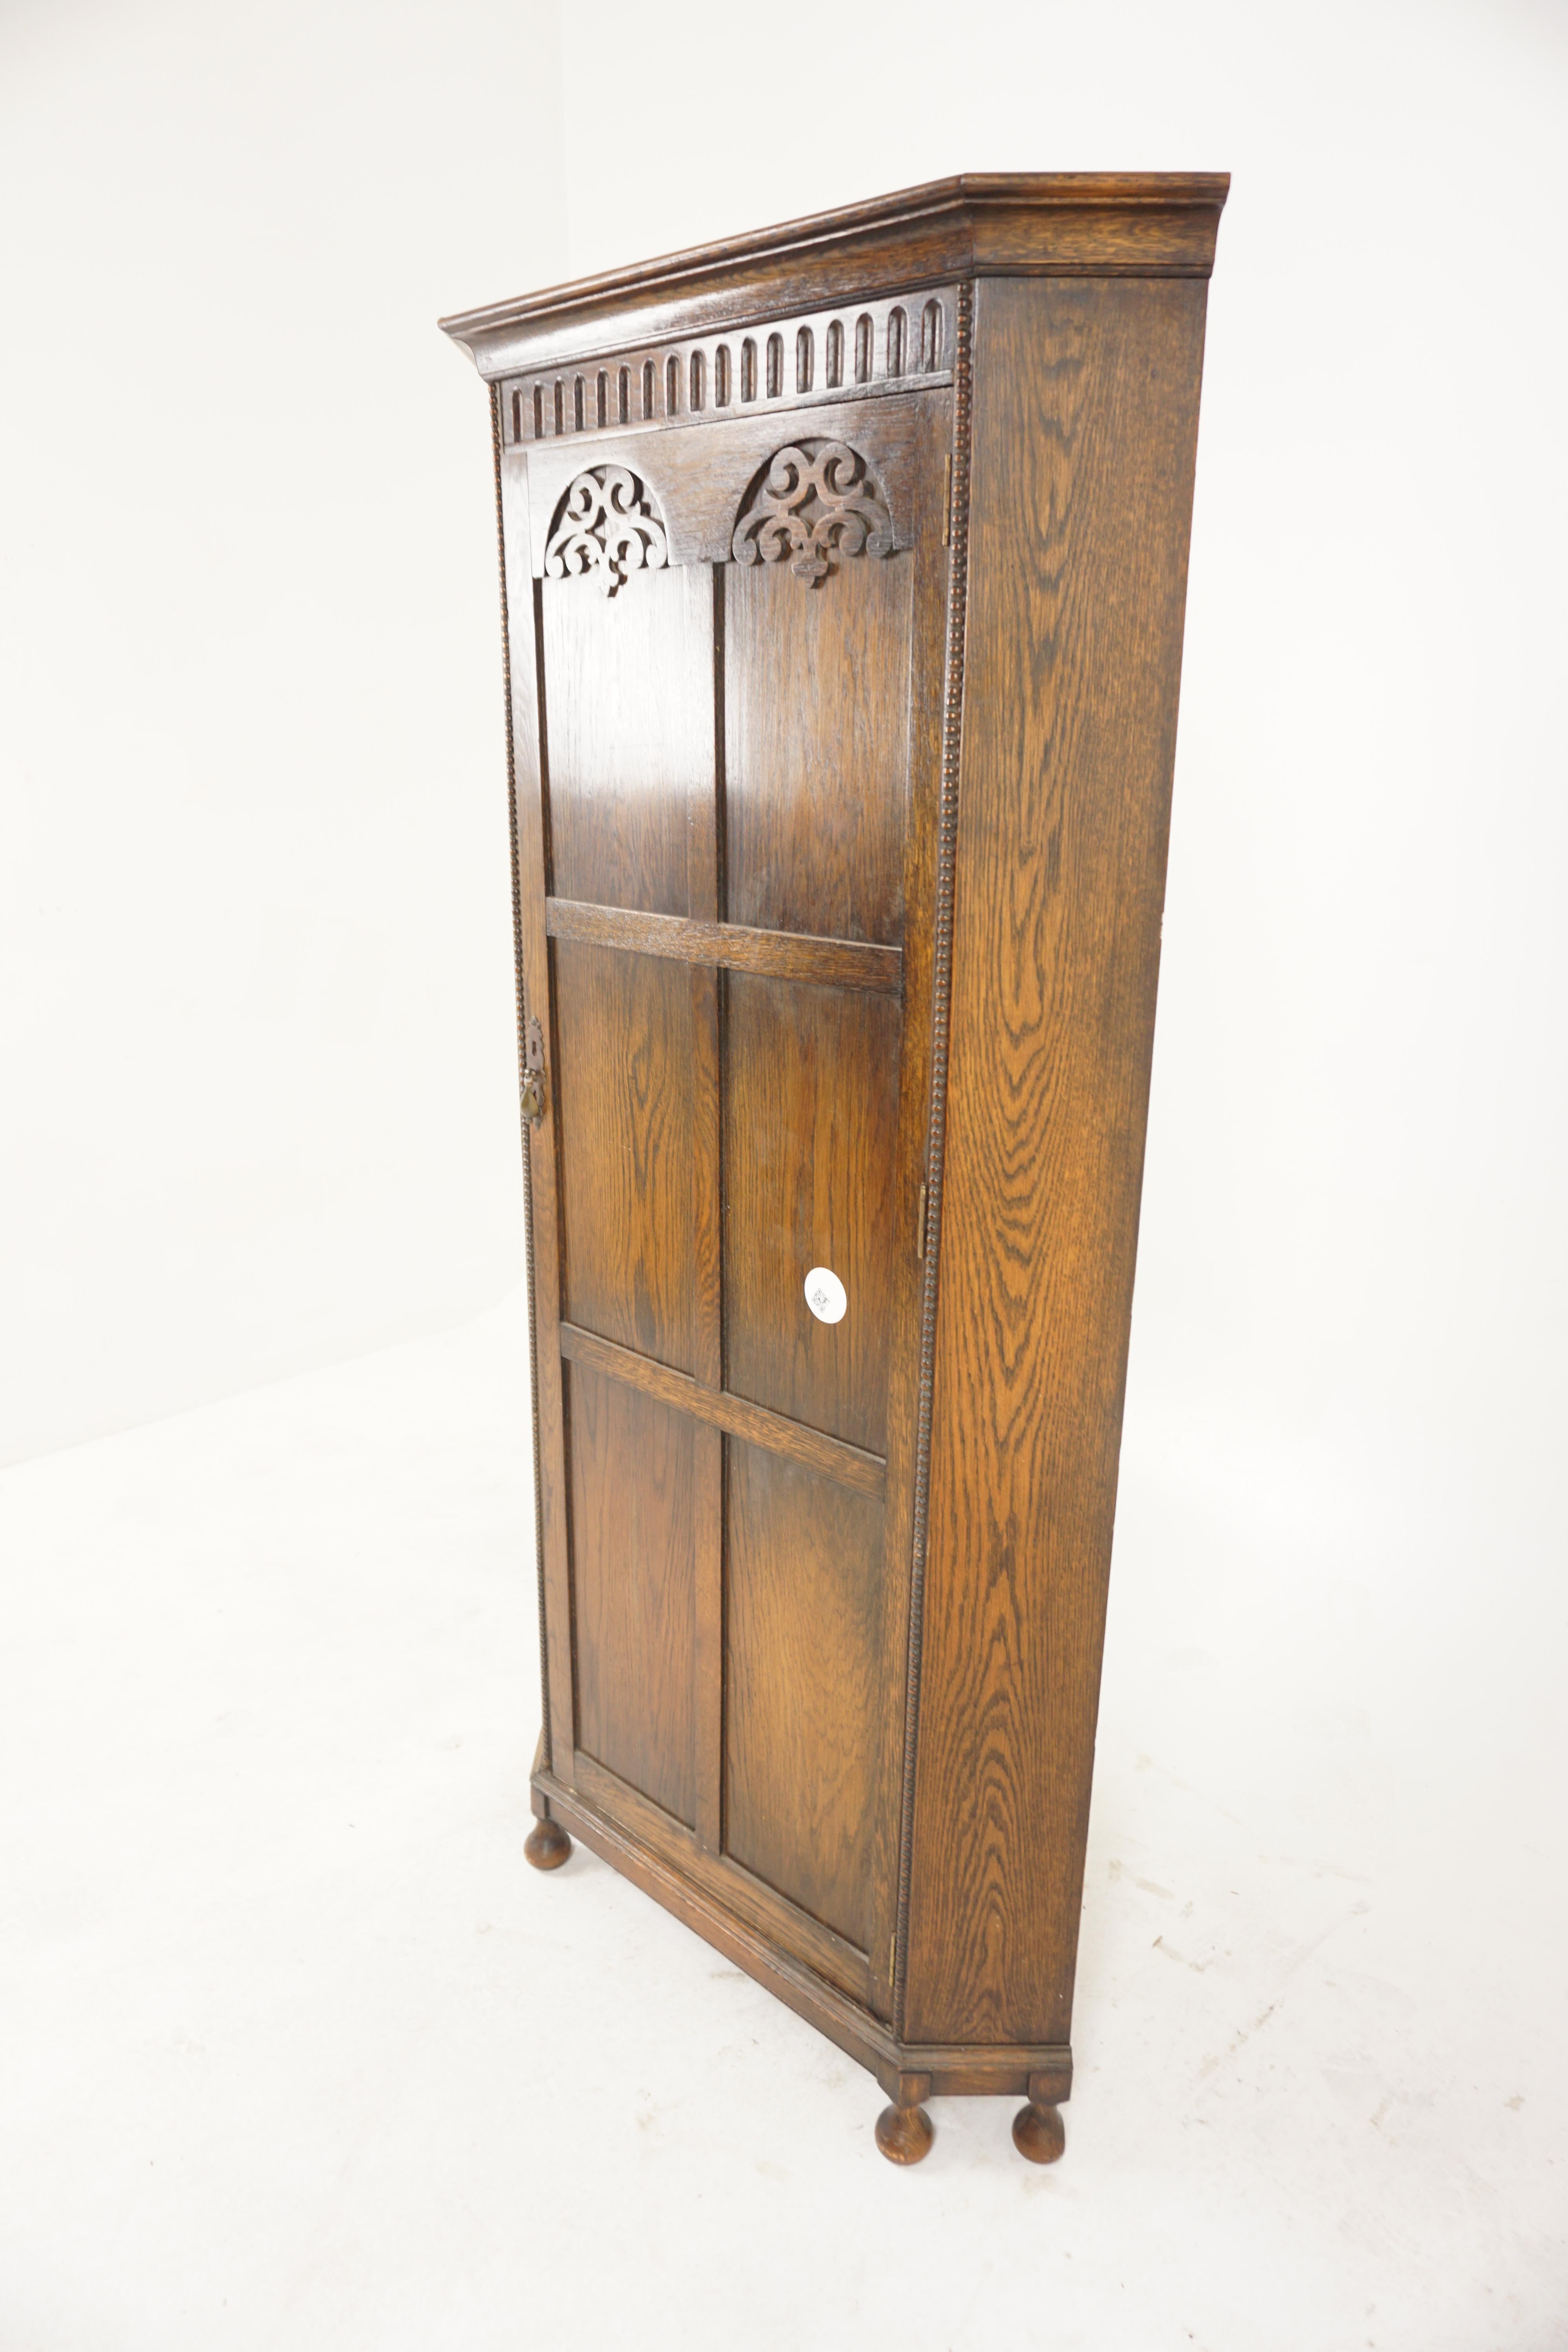 Antique Carved Oak Corner Hall Armoire Wardrobe Closet, Scotland 1910, H1028 

Scotland 1910
Solid Oak
Original finish
Shaped moulded cornice
Thumbnail edging on the front
Flanked by canted corners
Single six panelled door opens to reveal brass coat